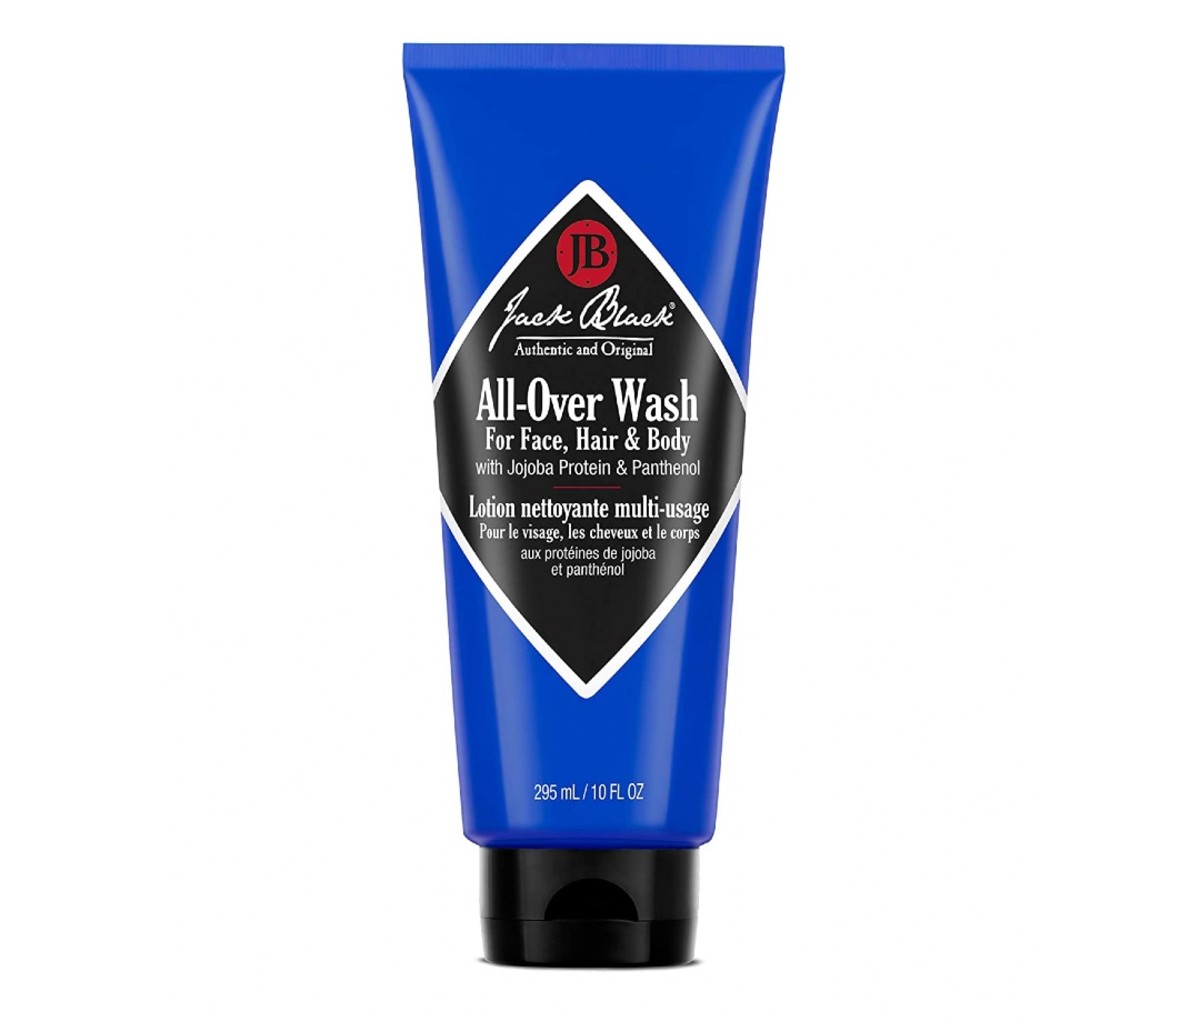 Jack Black’s All-Over Wash for Face, Hair and Body